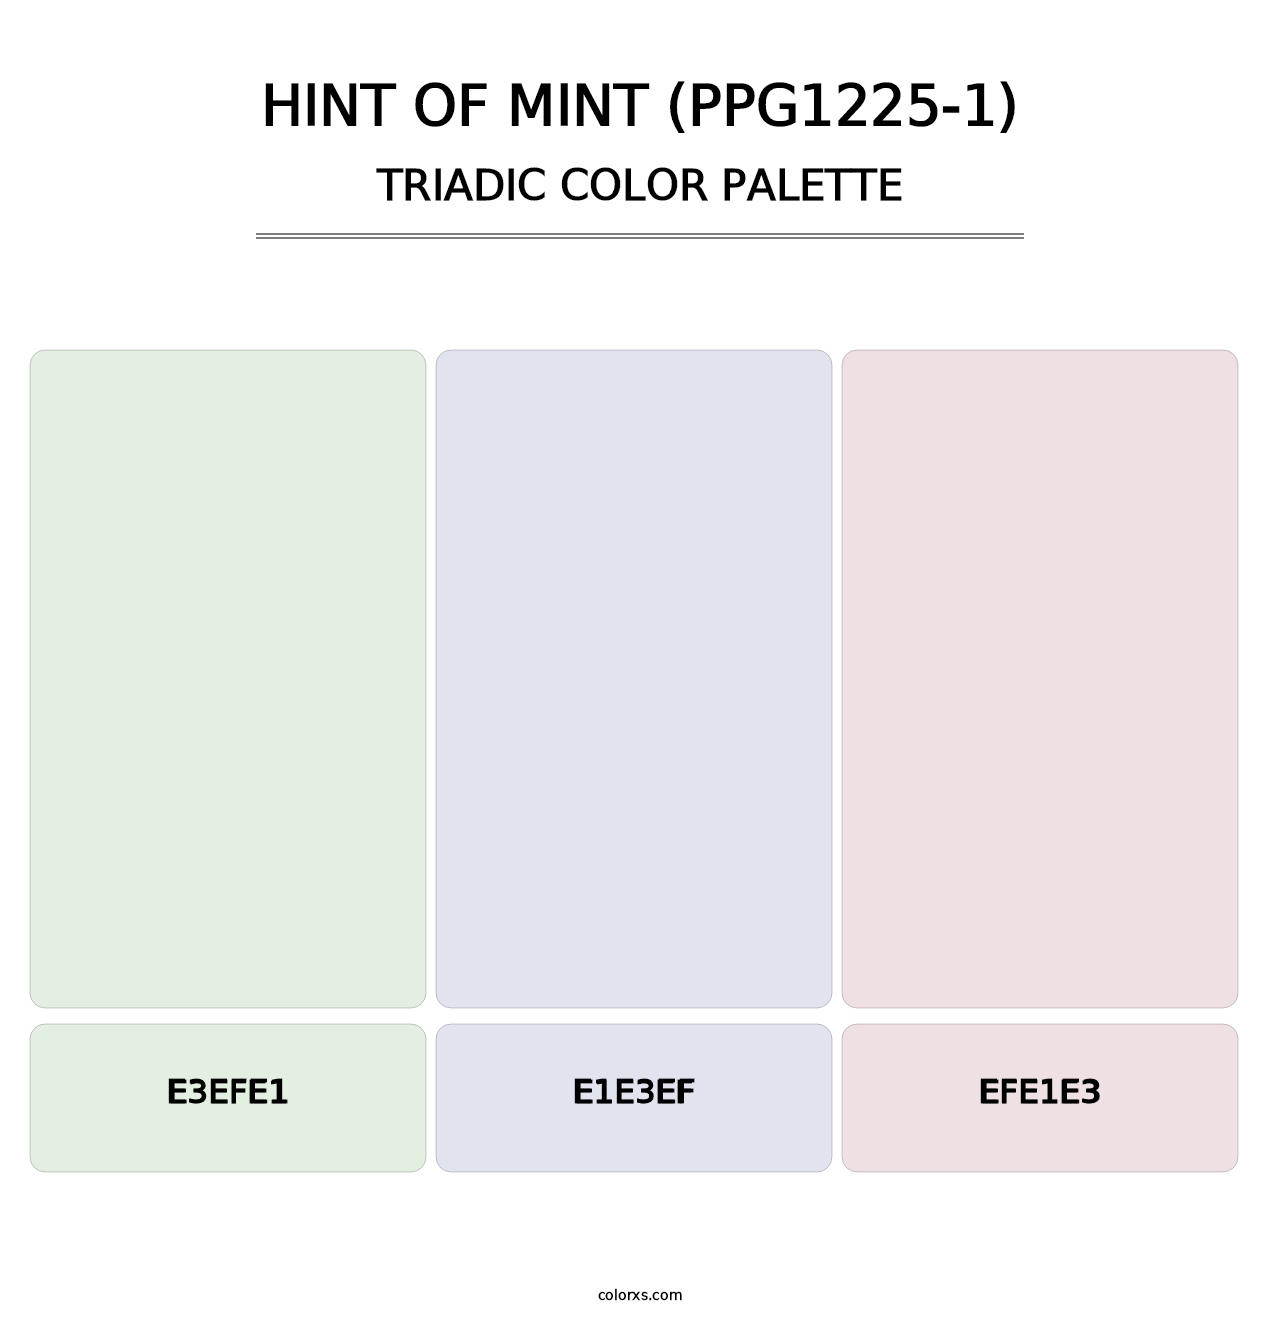 Hint Of Mint (PPG1225-1) - Triadic Color Palette